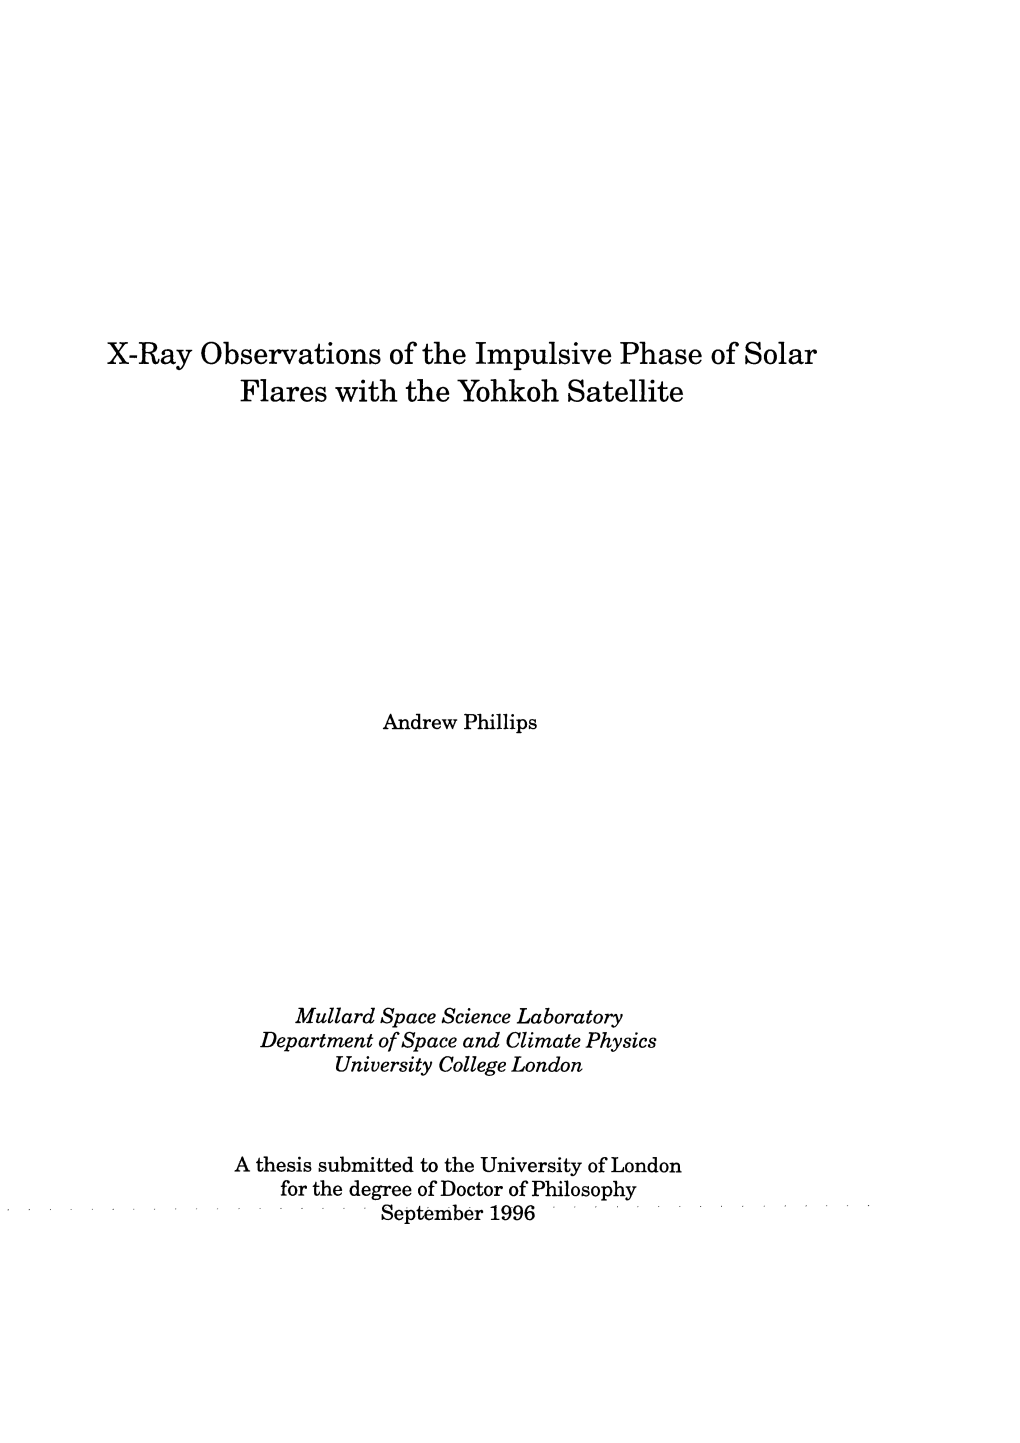 X-Ray Observations of the Impulsive Phase of Solar Flares with the Yohkoh Satellite